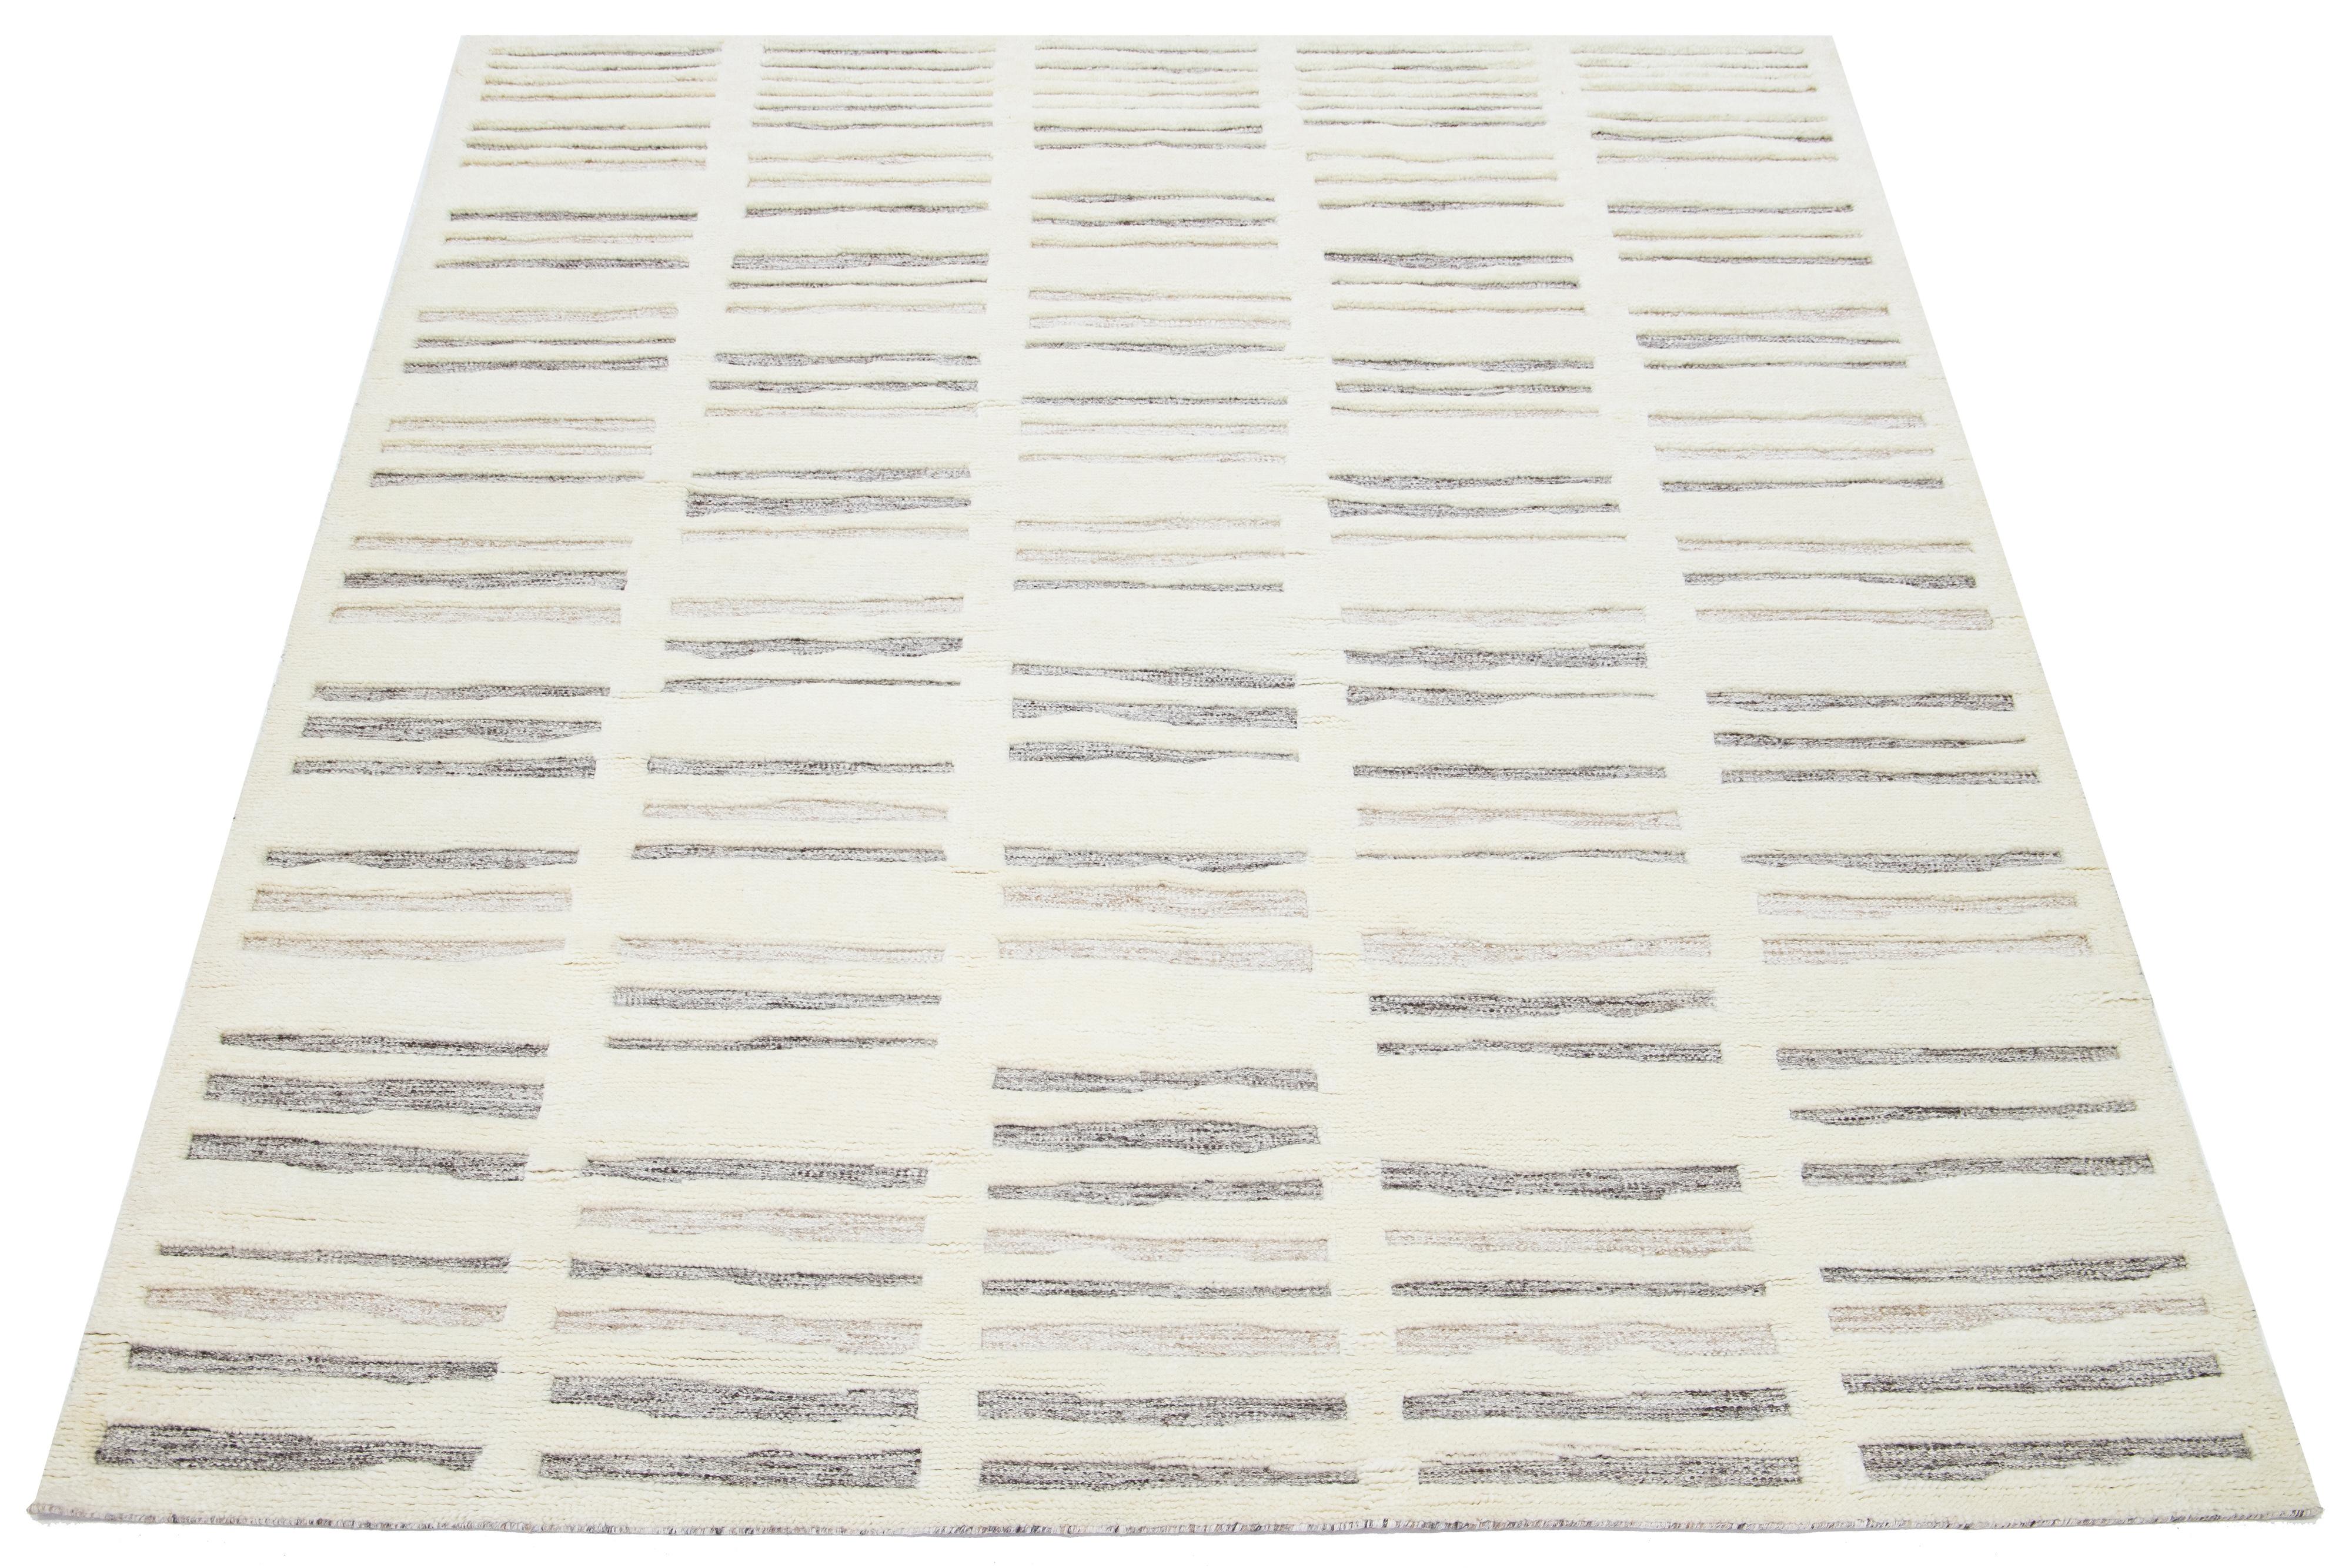 This Moroccan-style wool rug is hand-knotted and showcases a beautiful modern design with a natural ivory field. It features a stunning striped pattern in gray and brown.

This rug measures 8' x 10'.